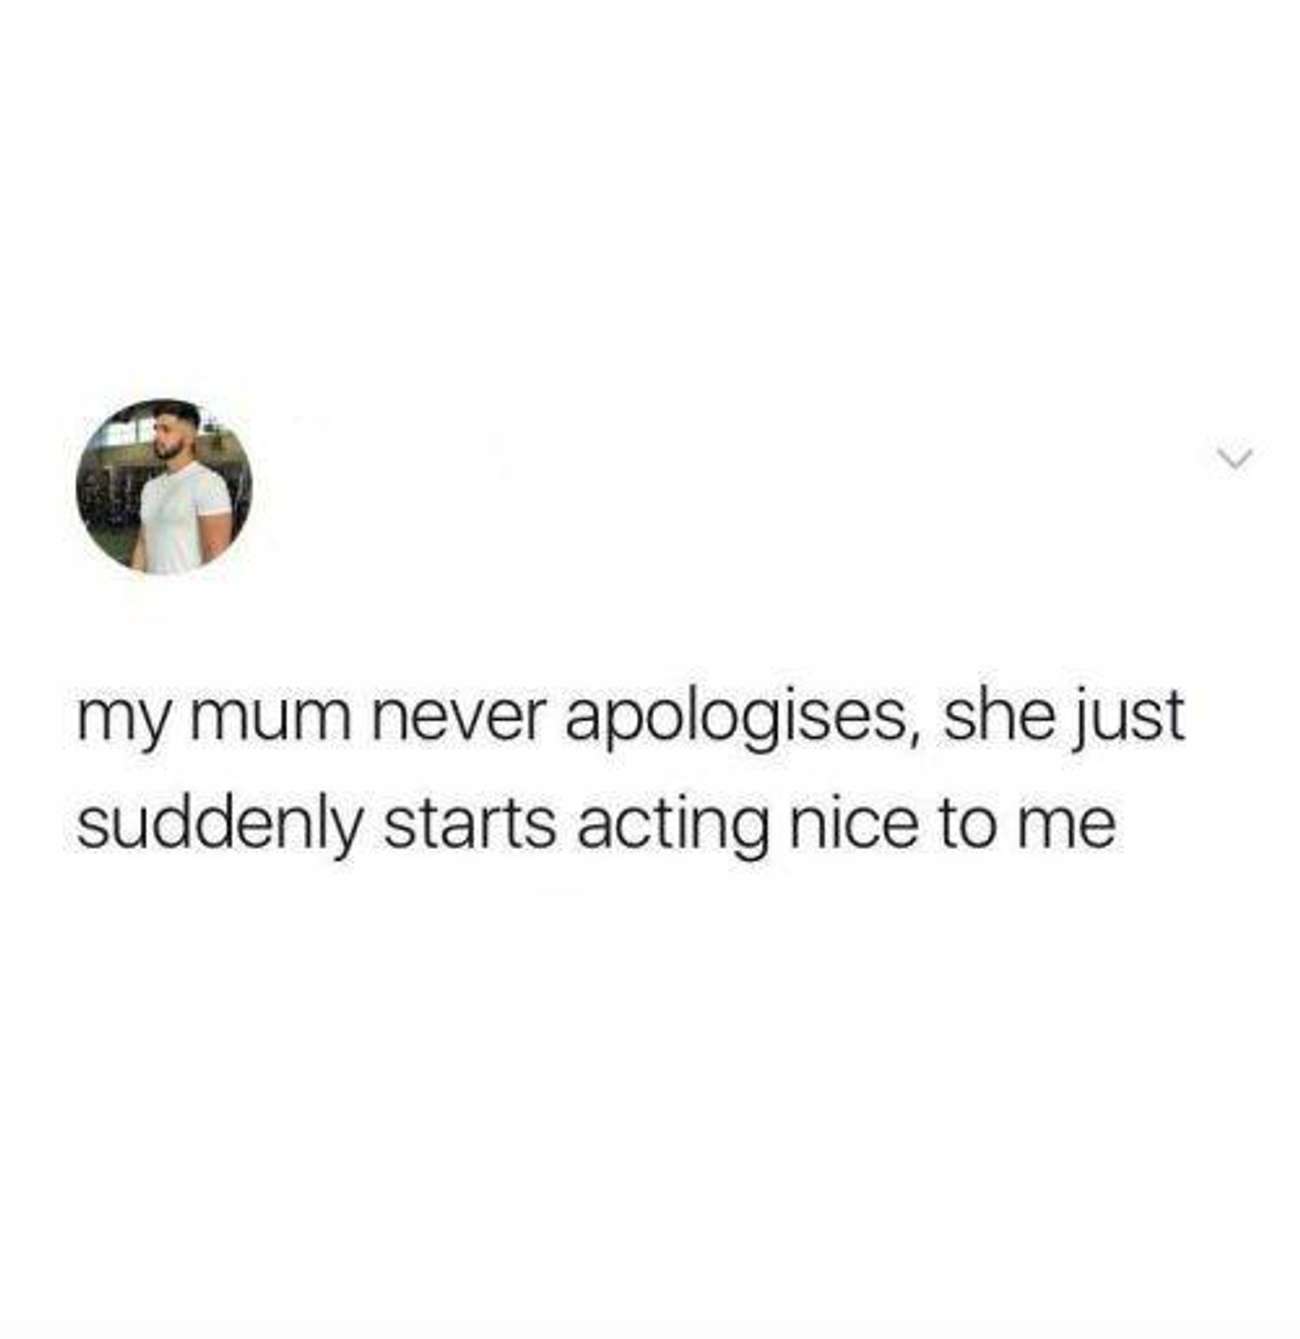 body jewelry - my mum never apologises, she just suddenly starts acting nice to me